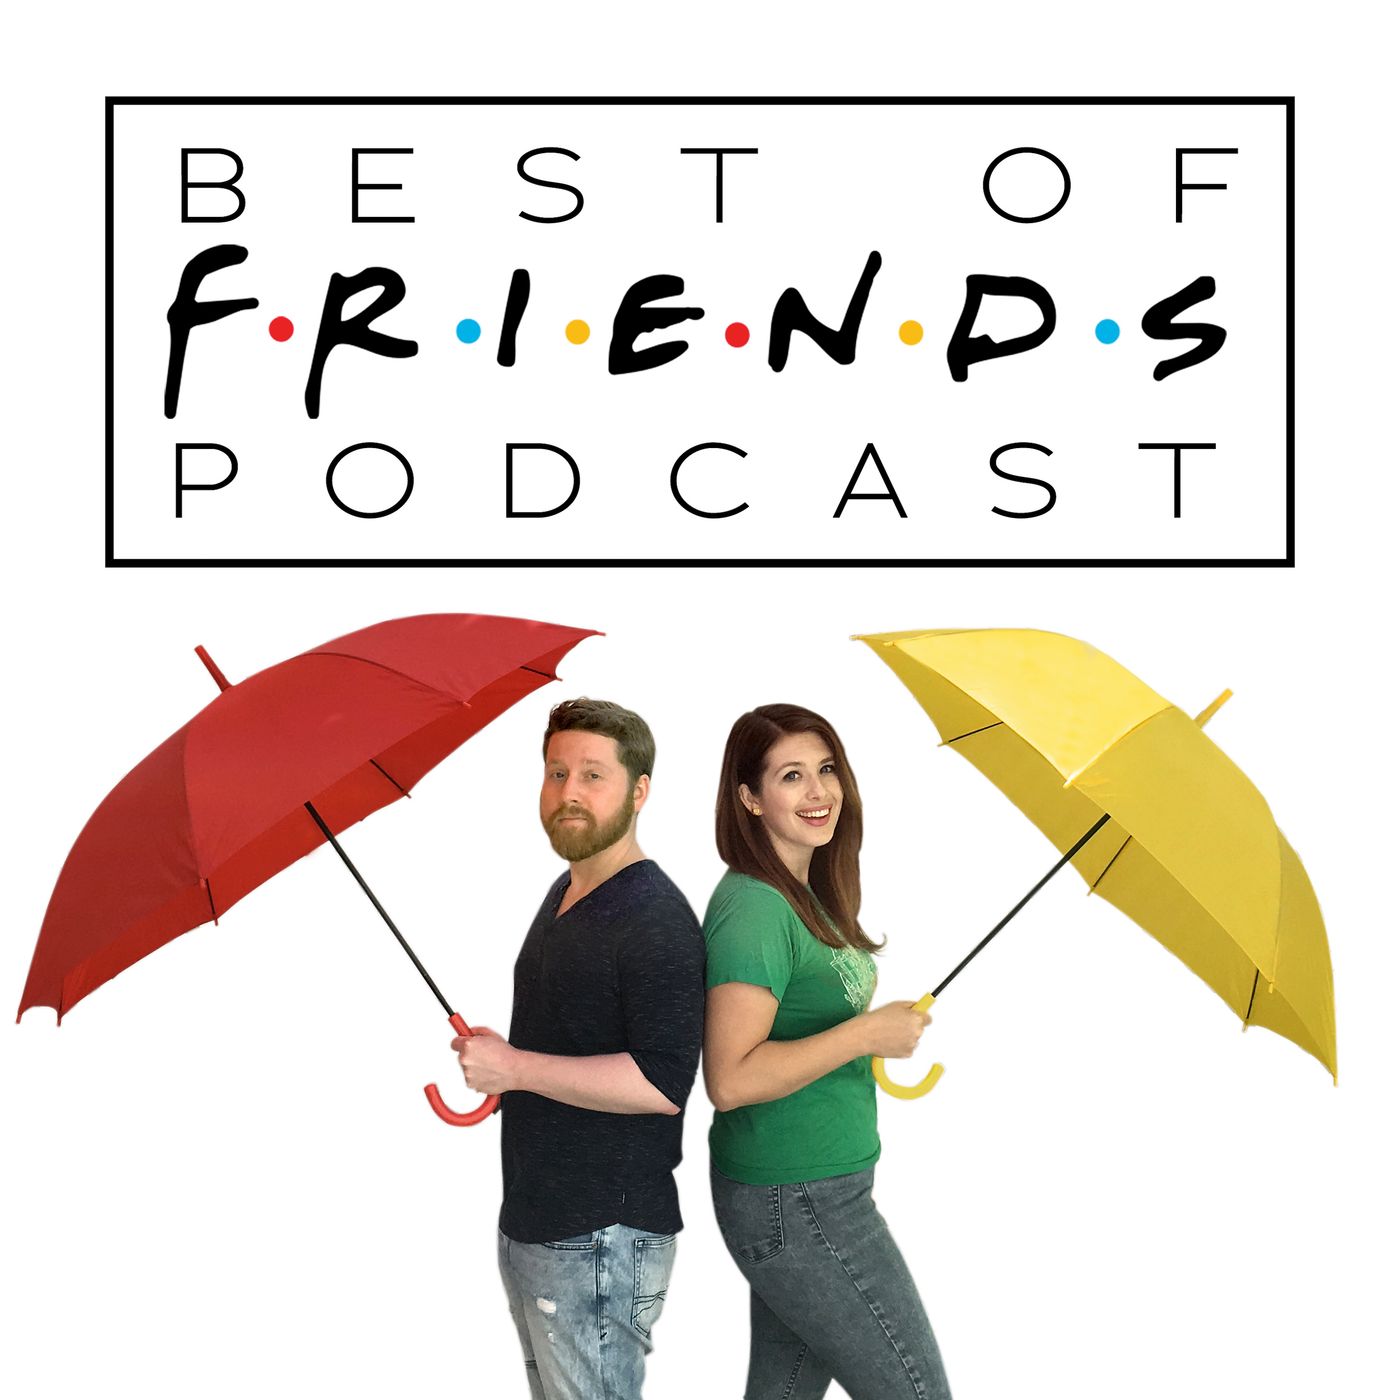 Episode 131: The One With The Obligatory Eggplant Emoji